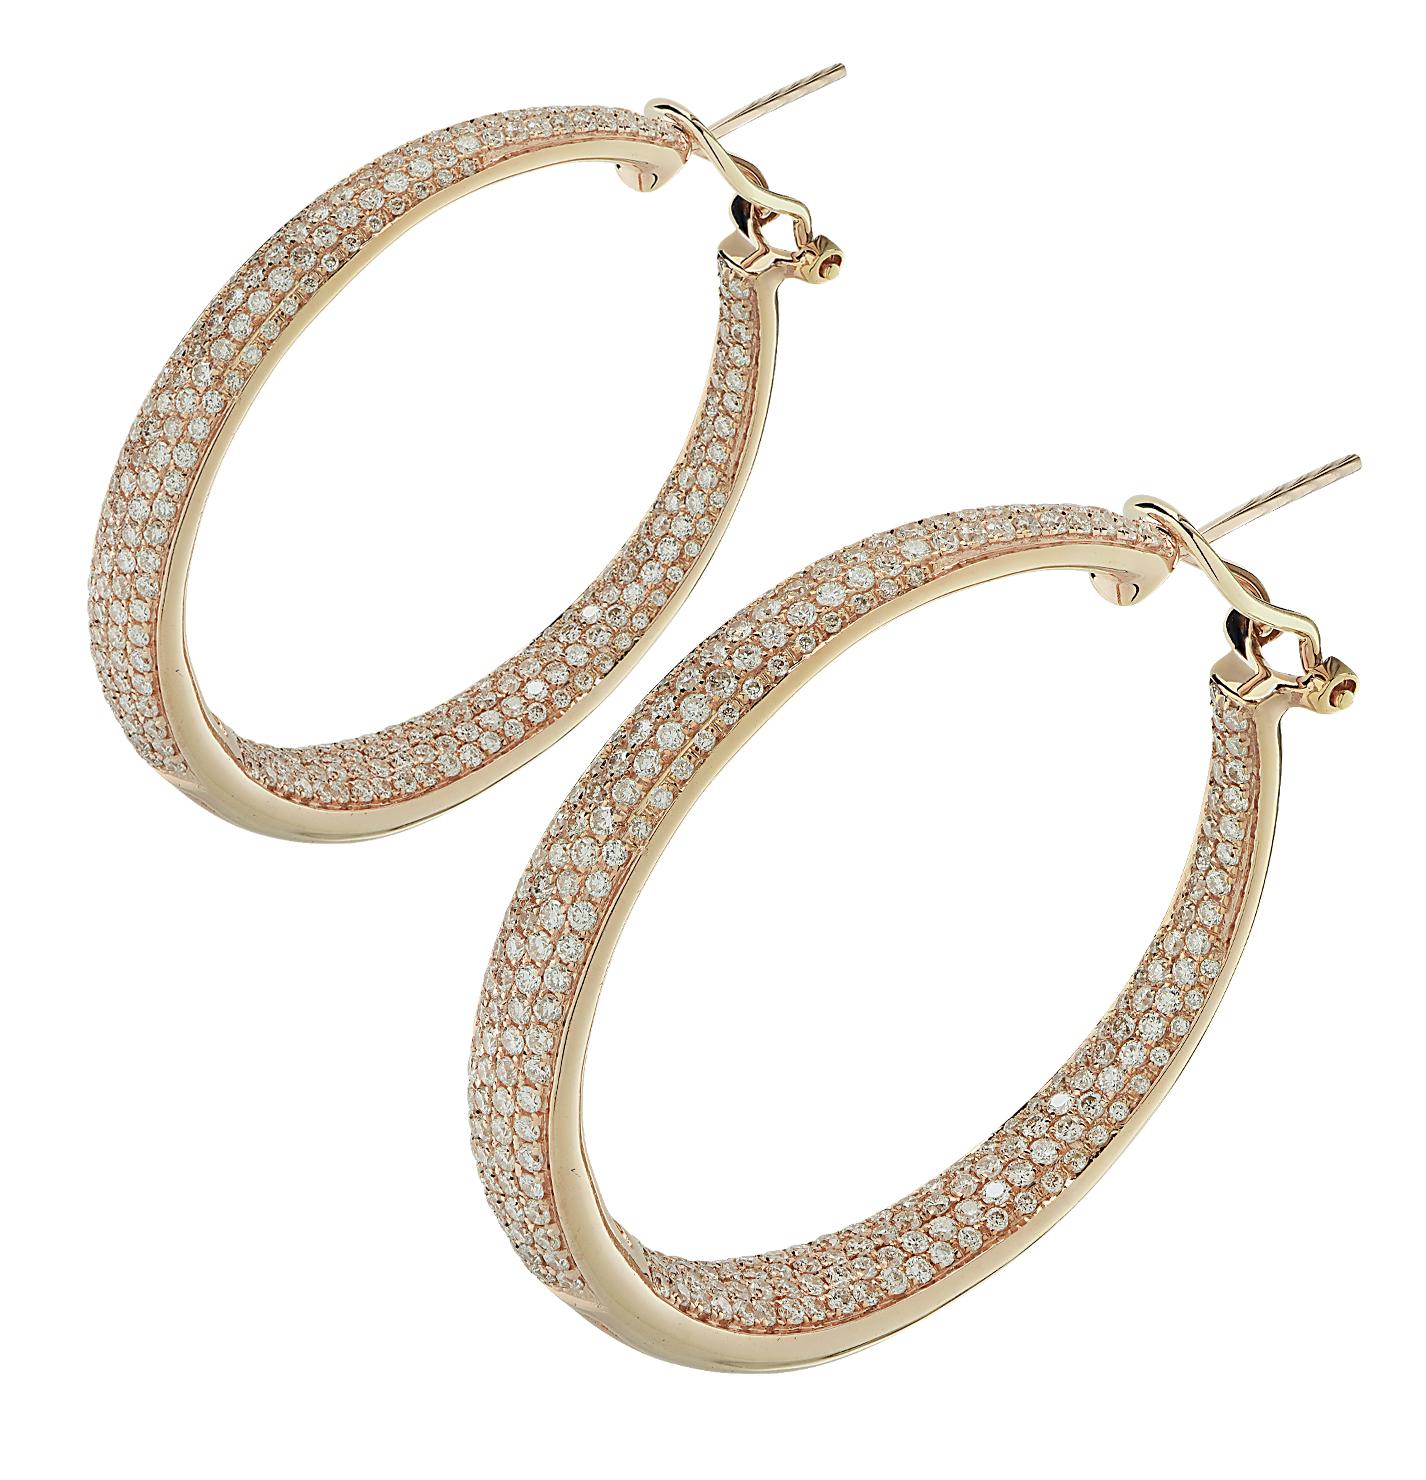 Round Cut Vivid Diamonds 4.5 Carat In And Out Hoop Earrings